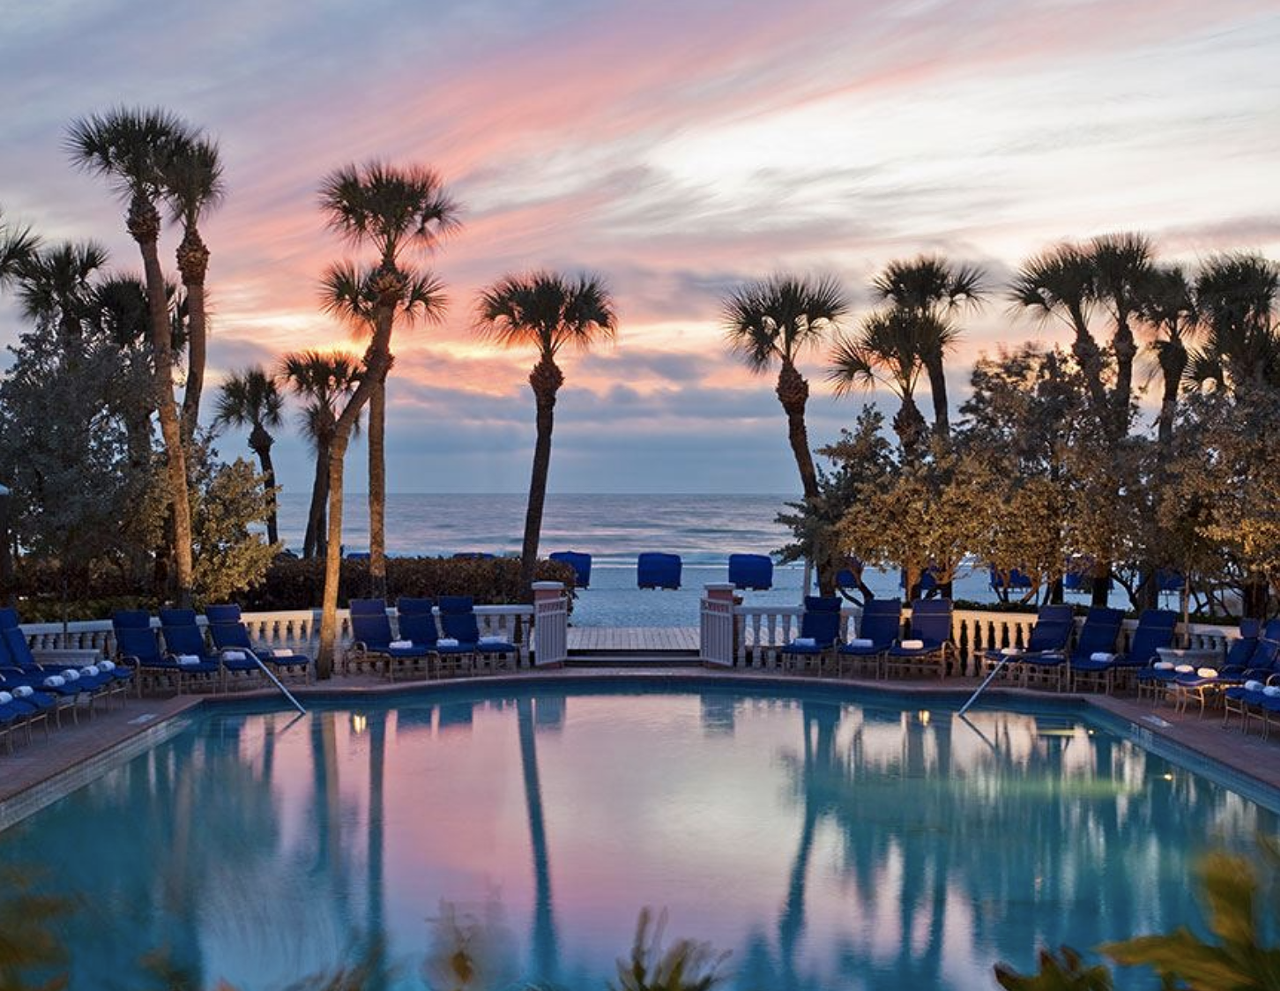 The Don CeSar
3400 Gulf Blvd, St. Pete Beach, 727-360-1881    
$20-$75
Day passes at the iconic “Pink Palace” start at $20 for kids and $75 for adults, and include access to the beach, the hotel’s two heated pools, indoor jacuzzi, poolside food and drink service and free Wi-Fi. Parking in the hotel’s lot is $24 and $31 for valet service.
Photo via Don Cesar/Google